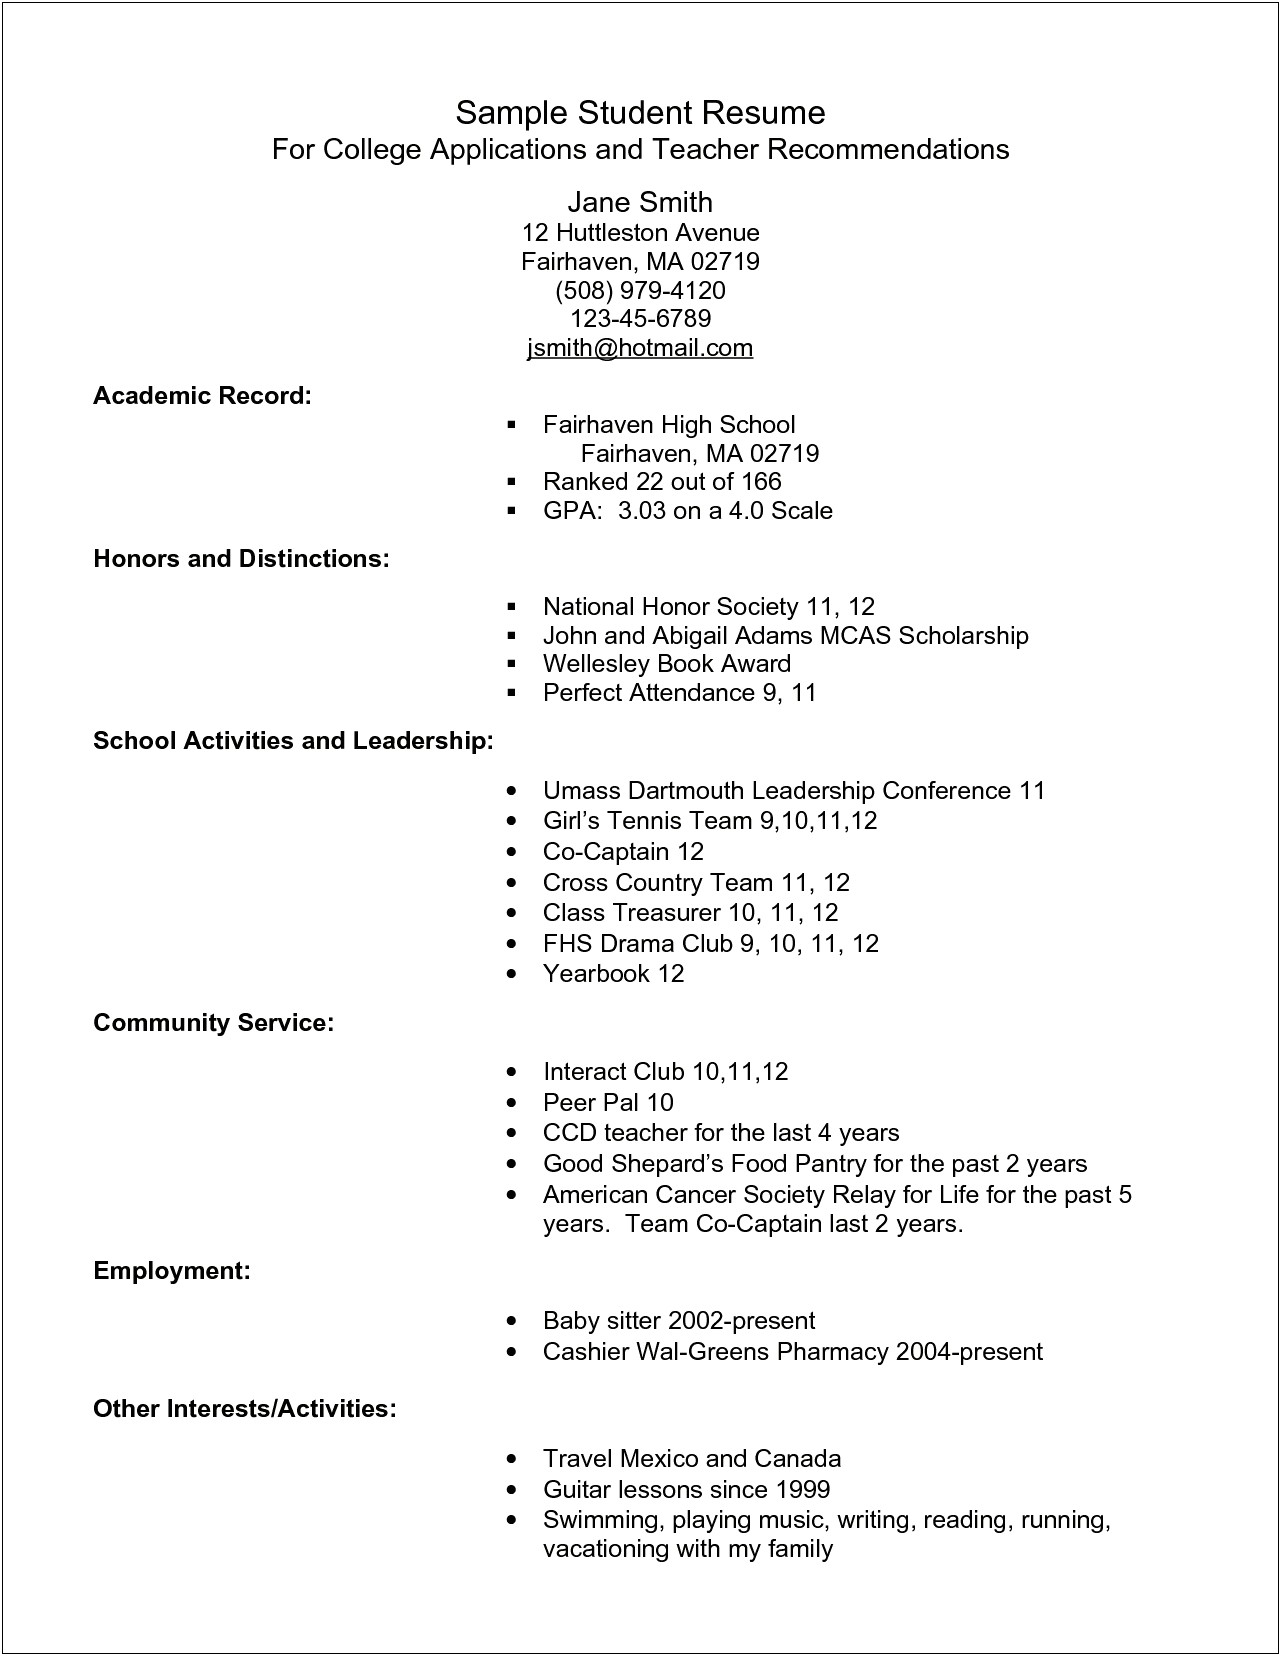 Resume Objective Examples For Graduate School Acceptance